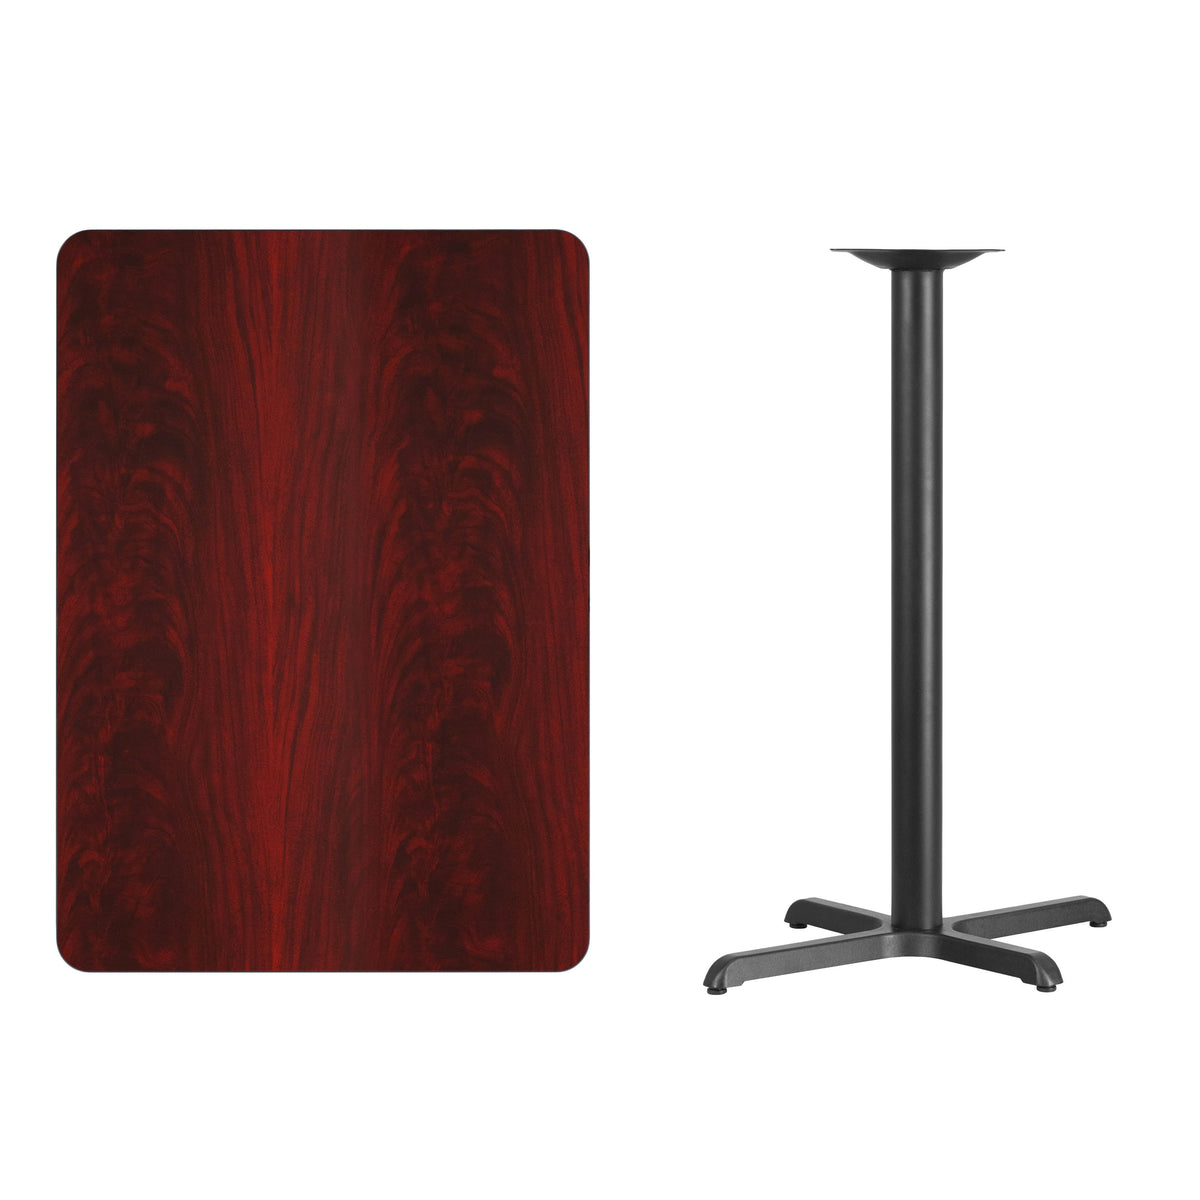 Mahogany |#| 30inch x 42inch Laminate Table Top with 23.5inch x 29.5inch Bar Height Table Base